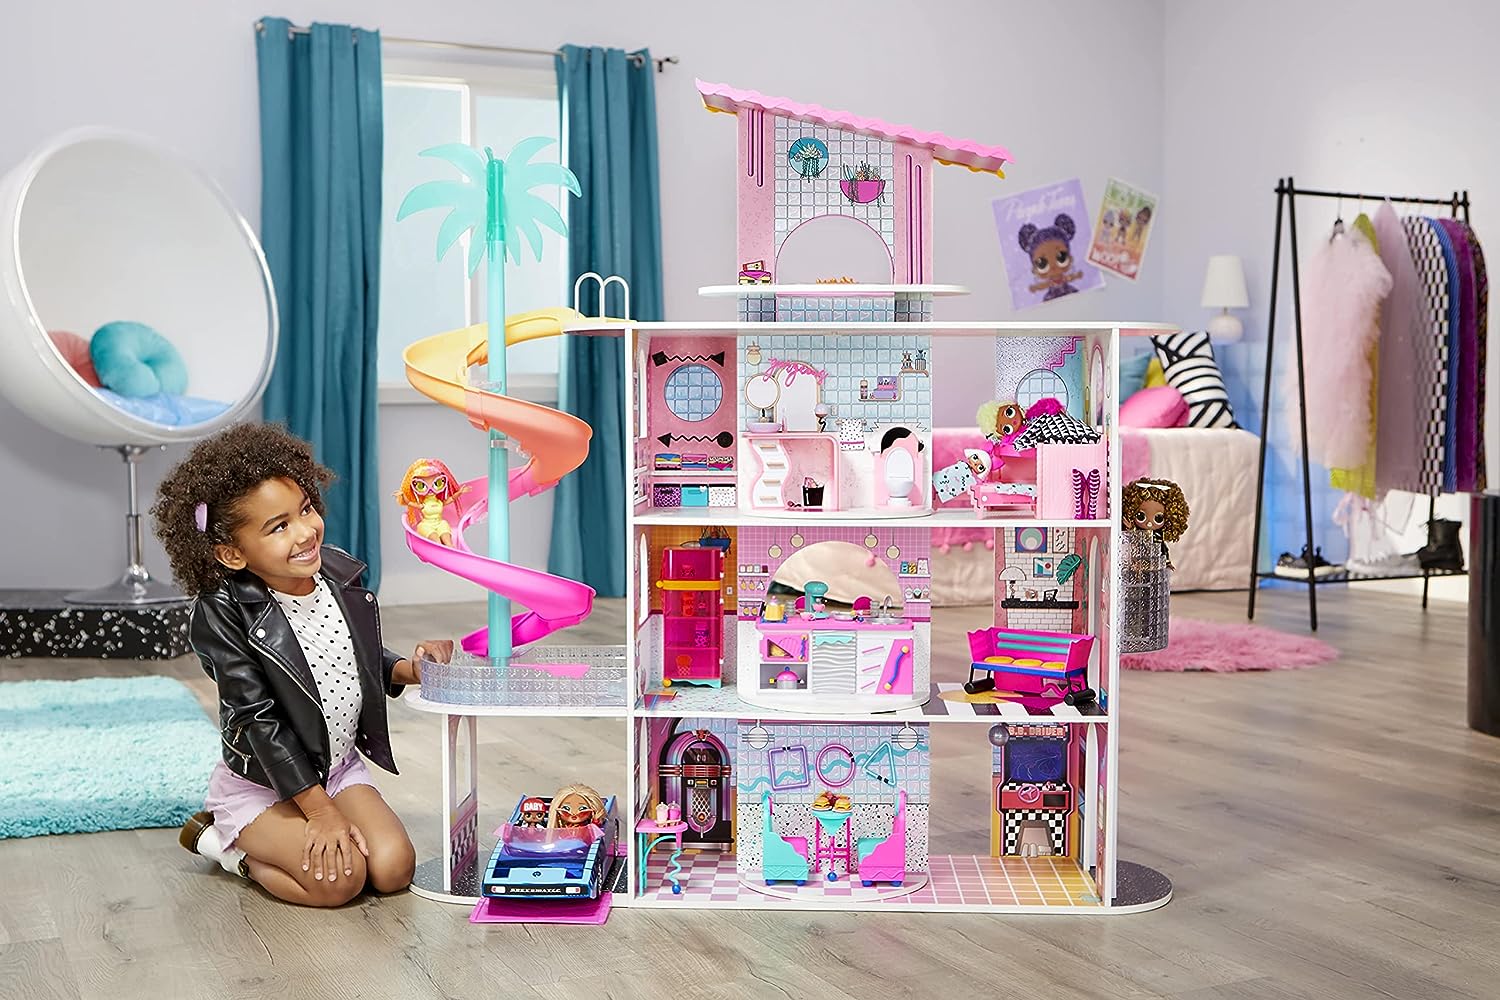 LOL Surprise Doll House With 85+ Surprises Wooden Multi Story Colorful  Girls-NEW